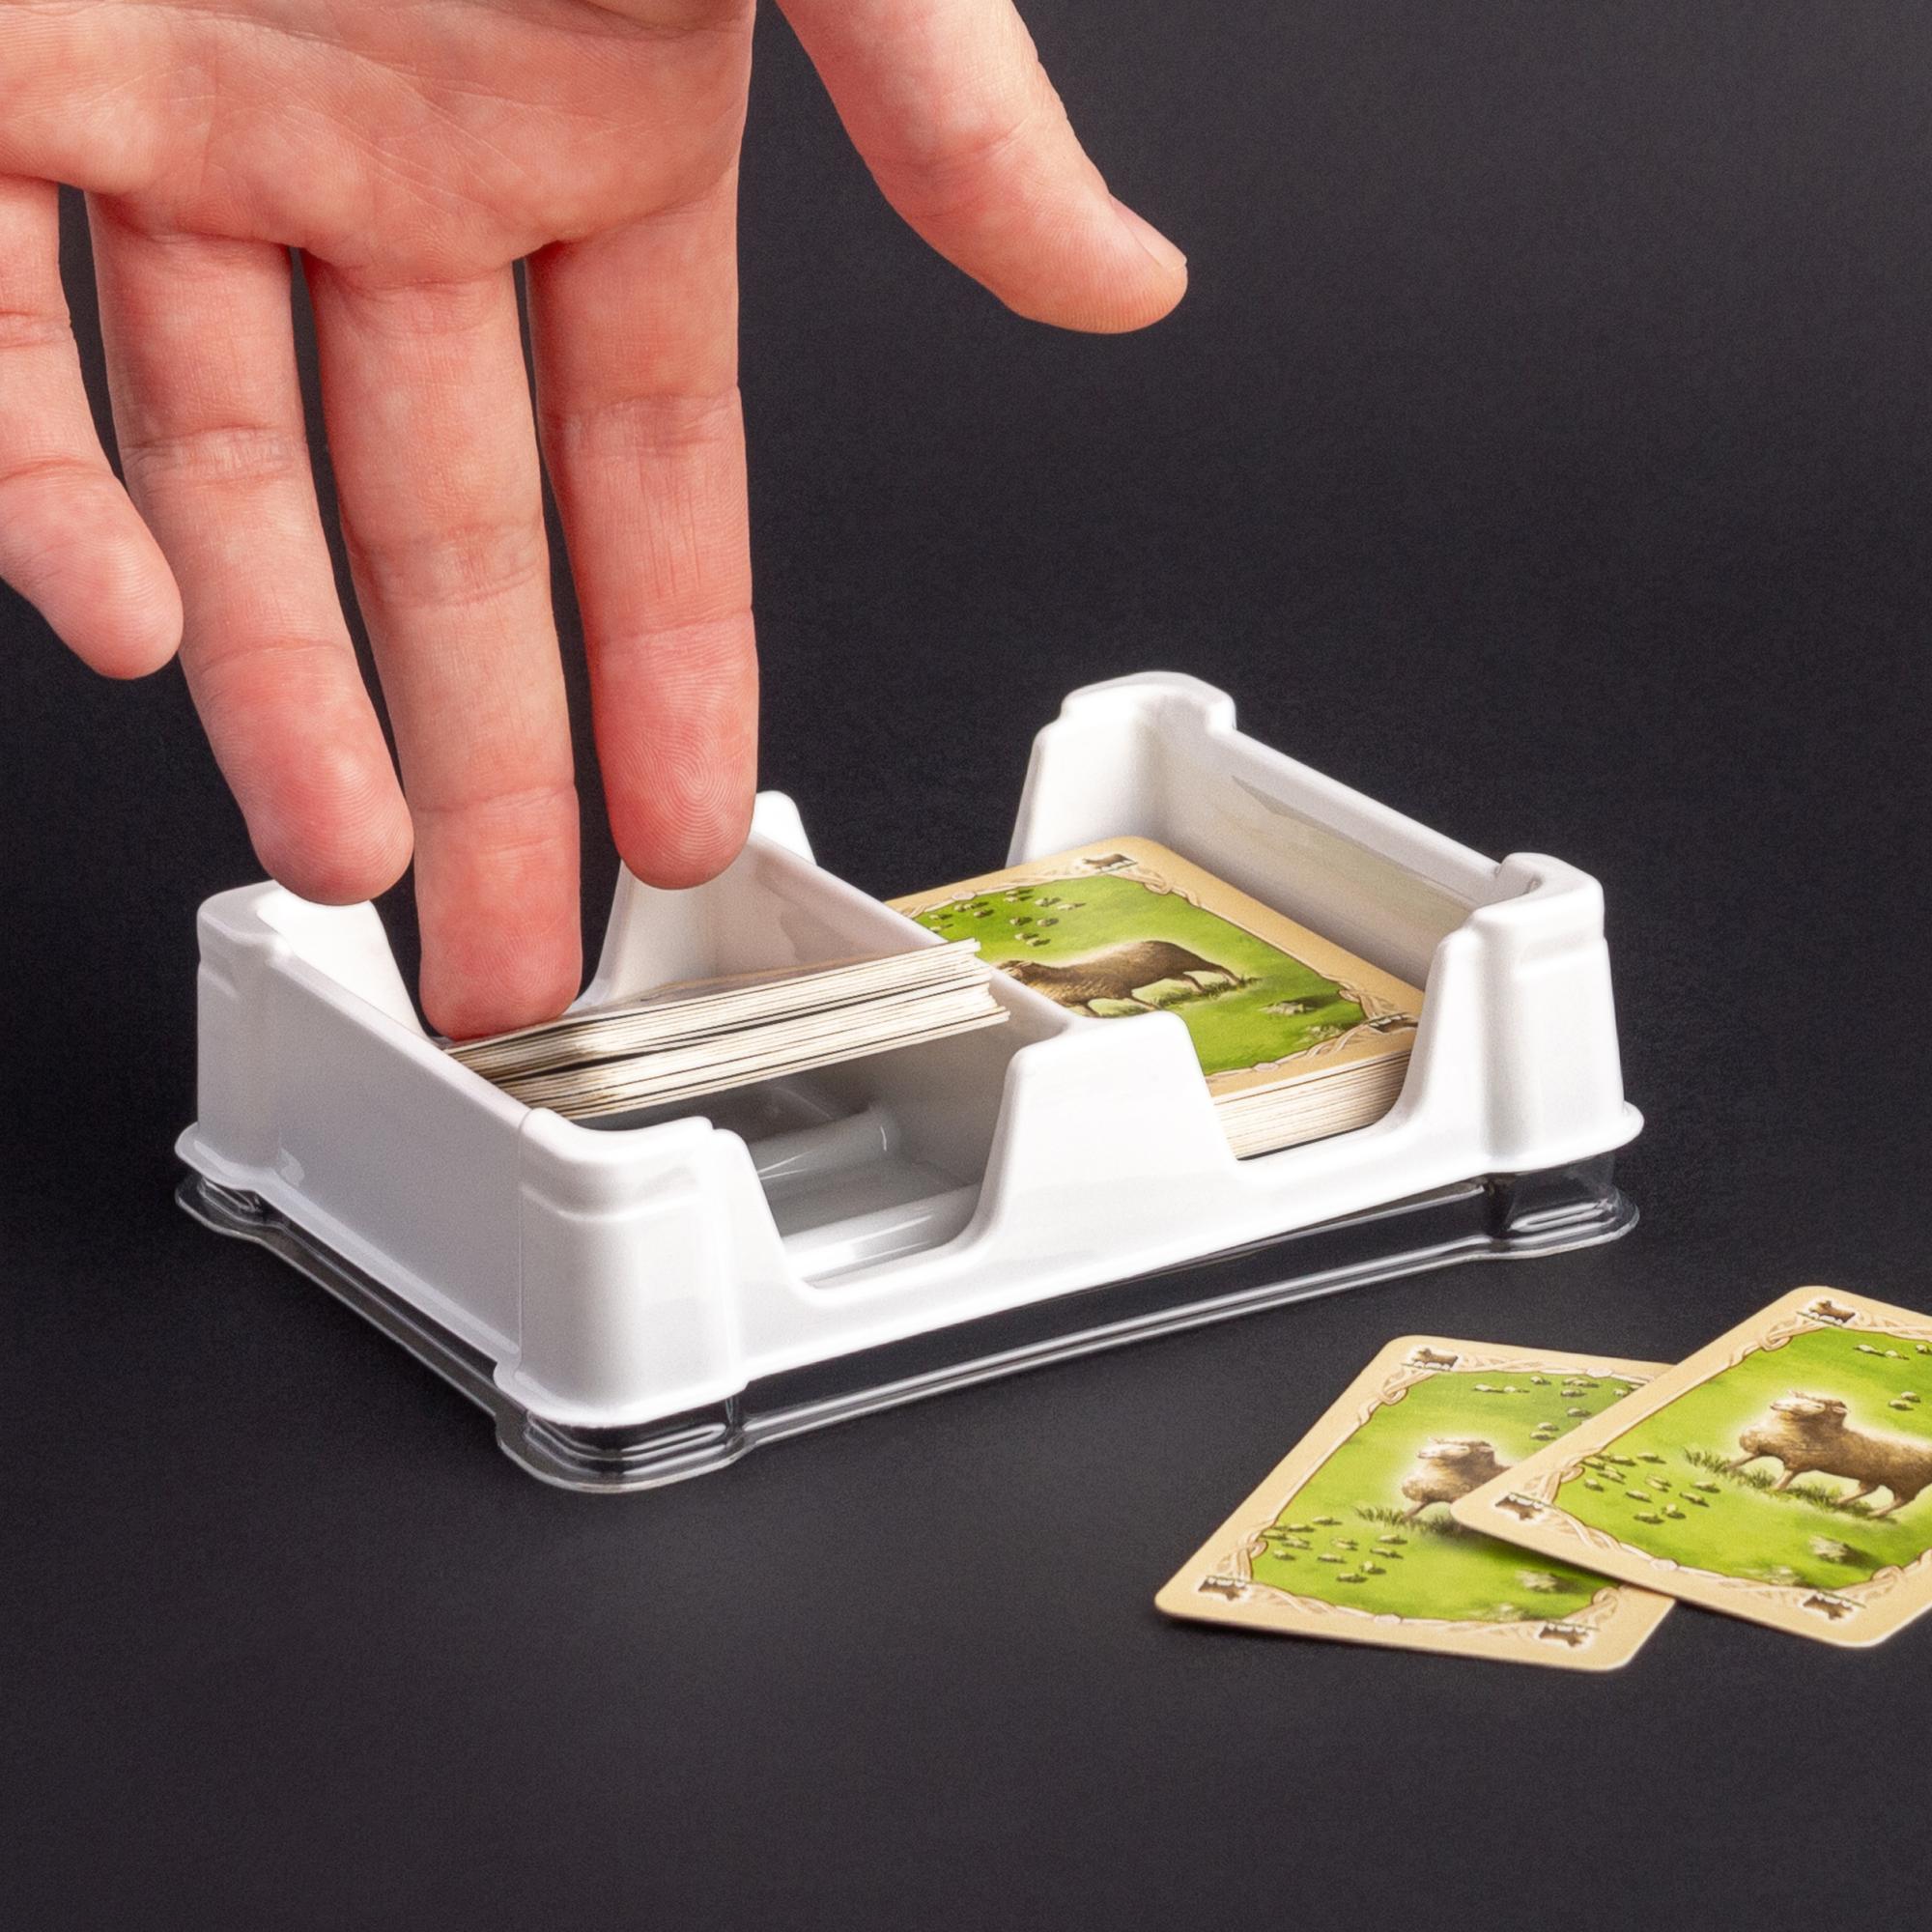 Toploader & ONE-TOUCH Card Sorting Tray - 4ct